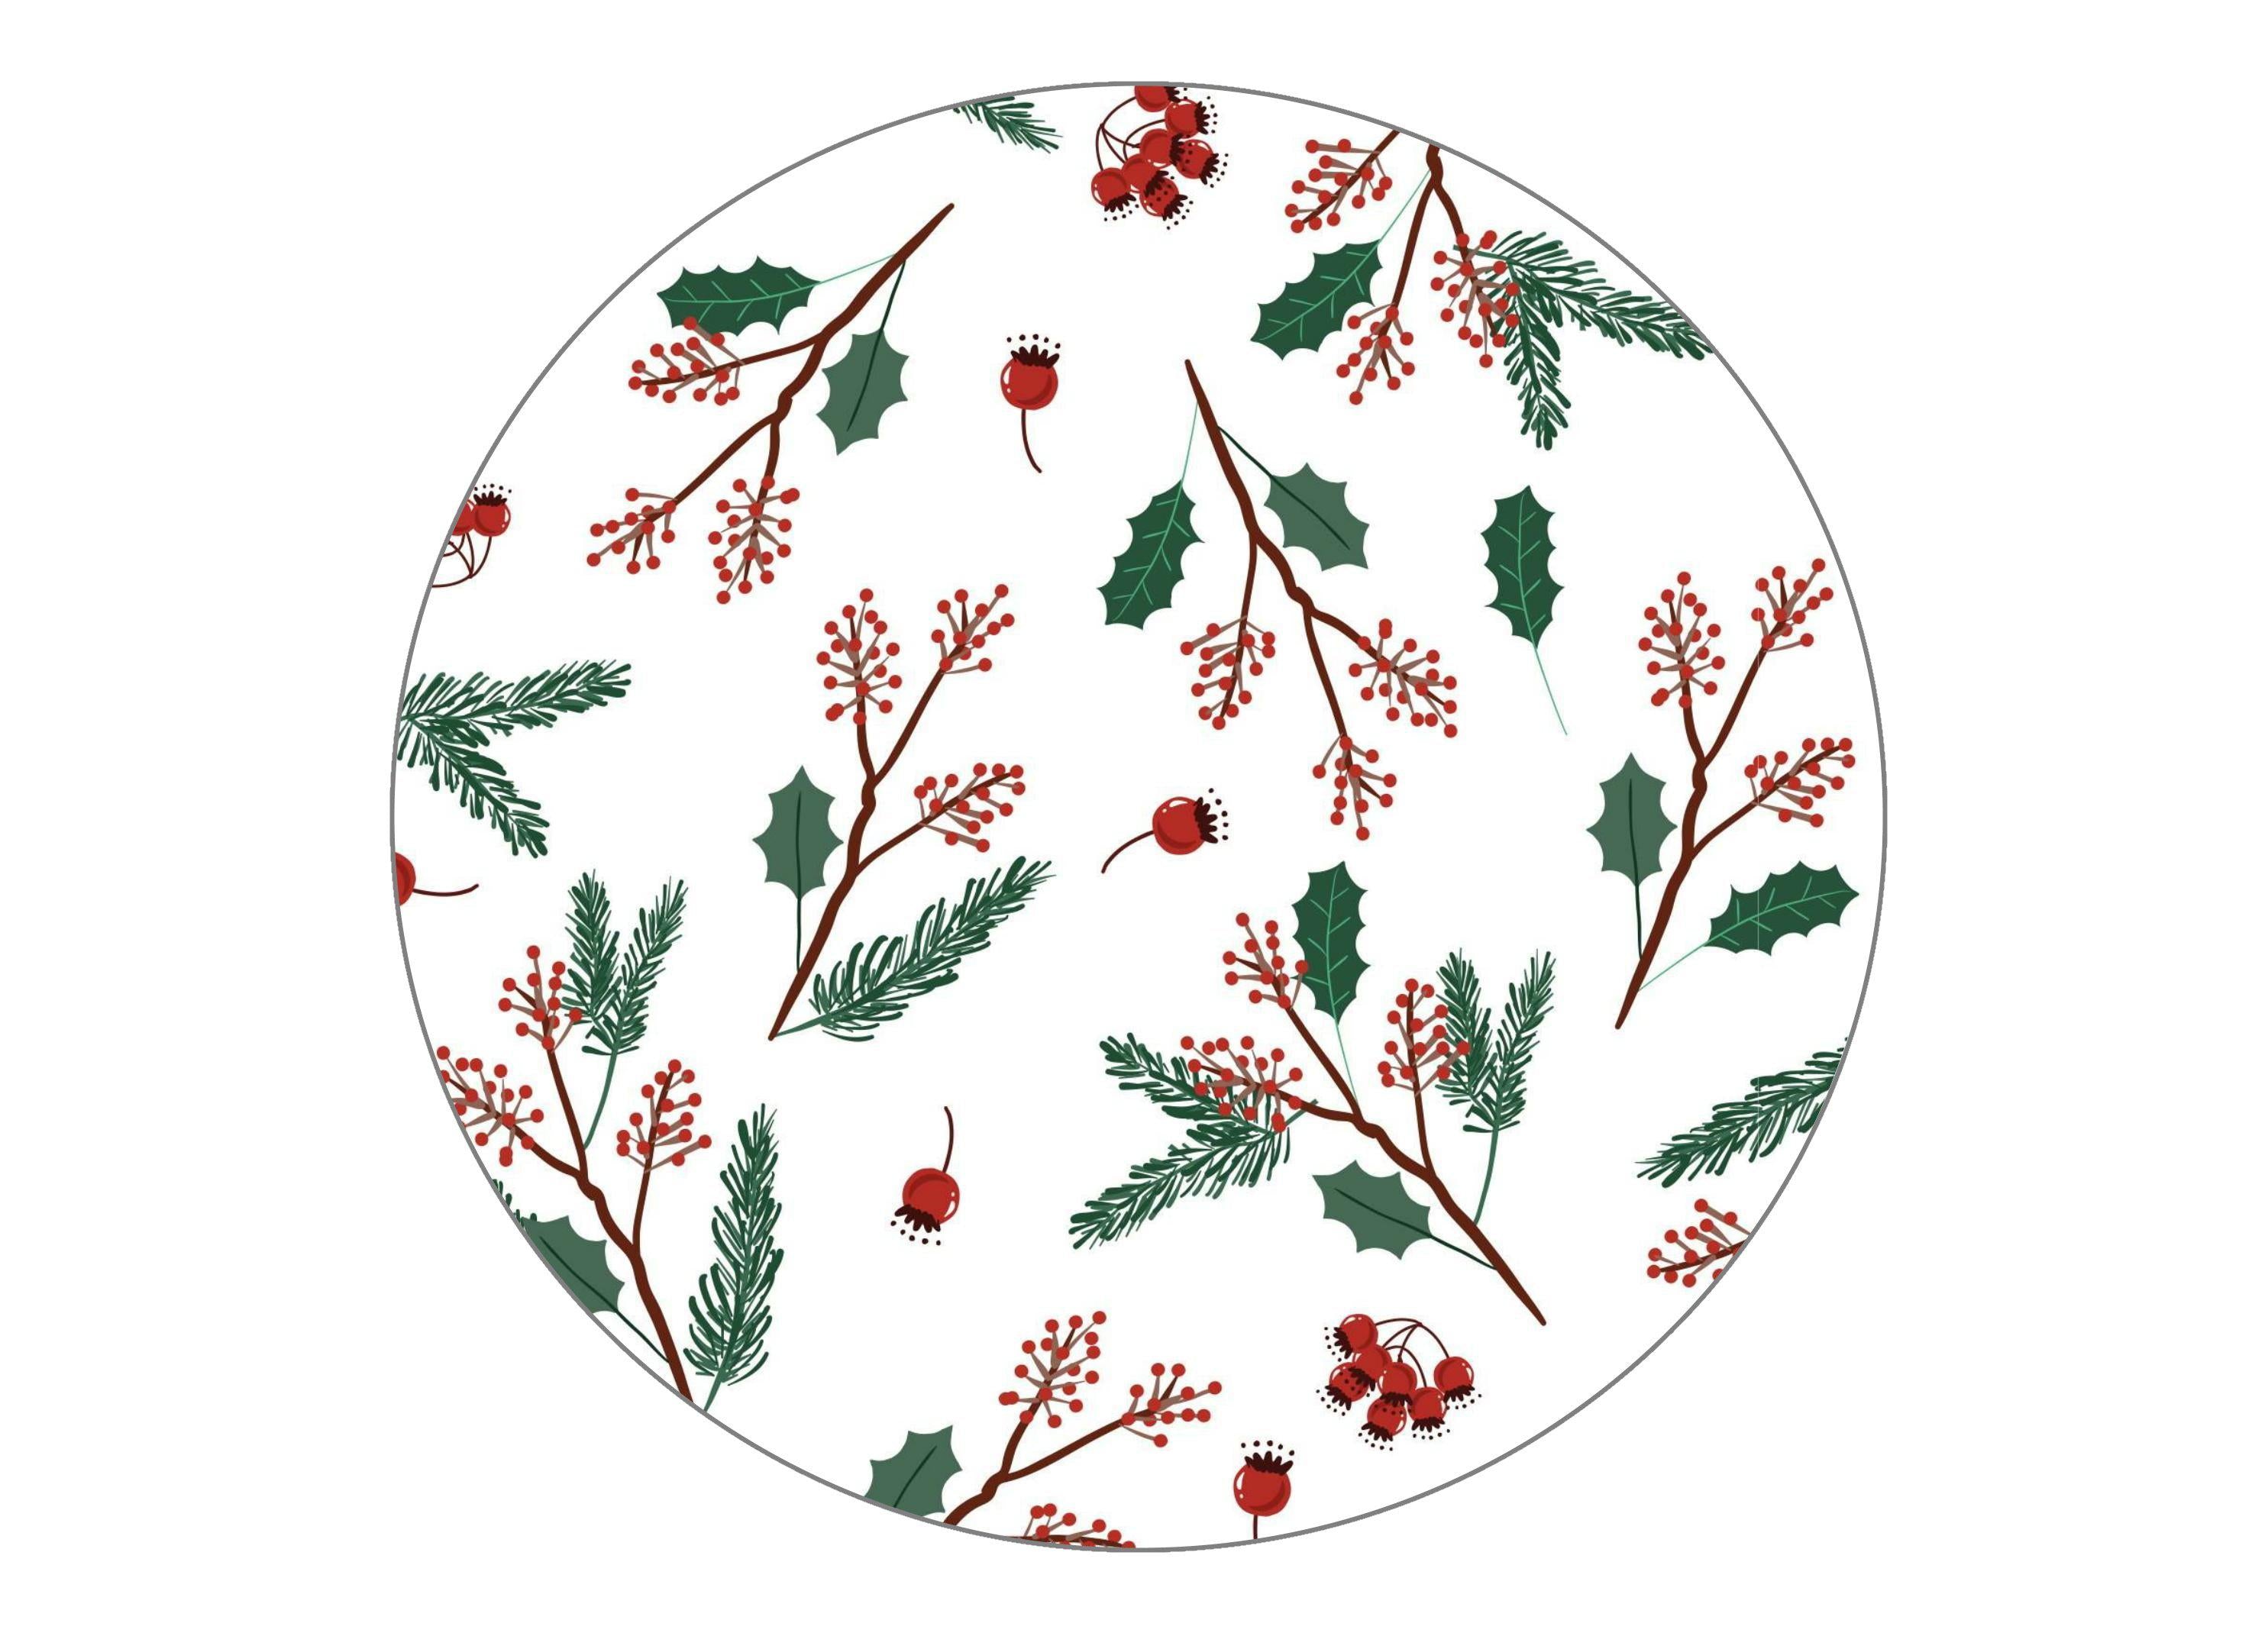 190mm printed cake topper with a Christmas holly pattern